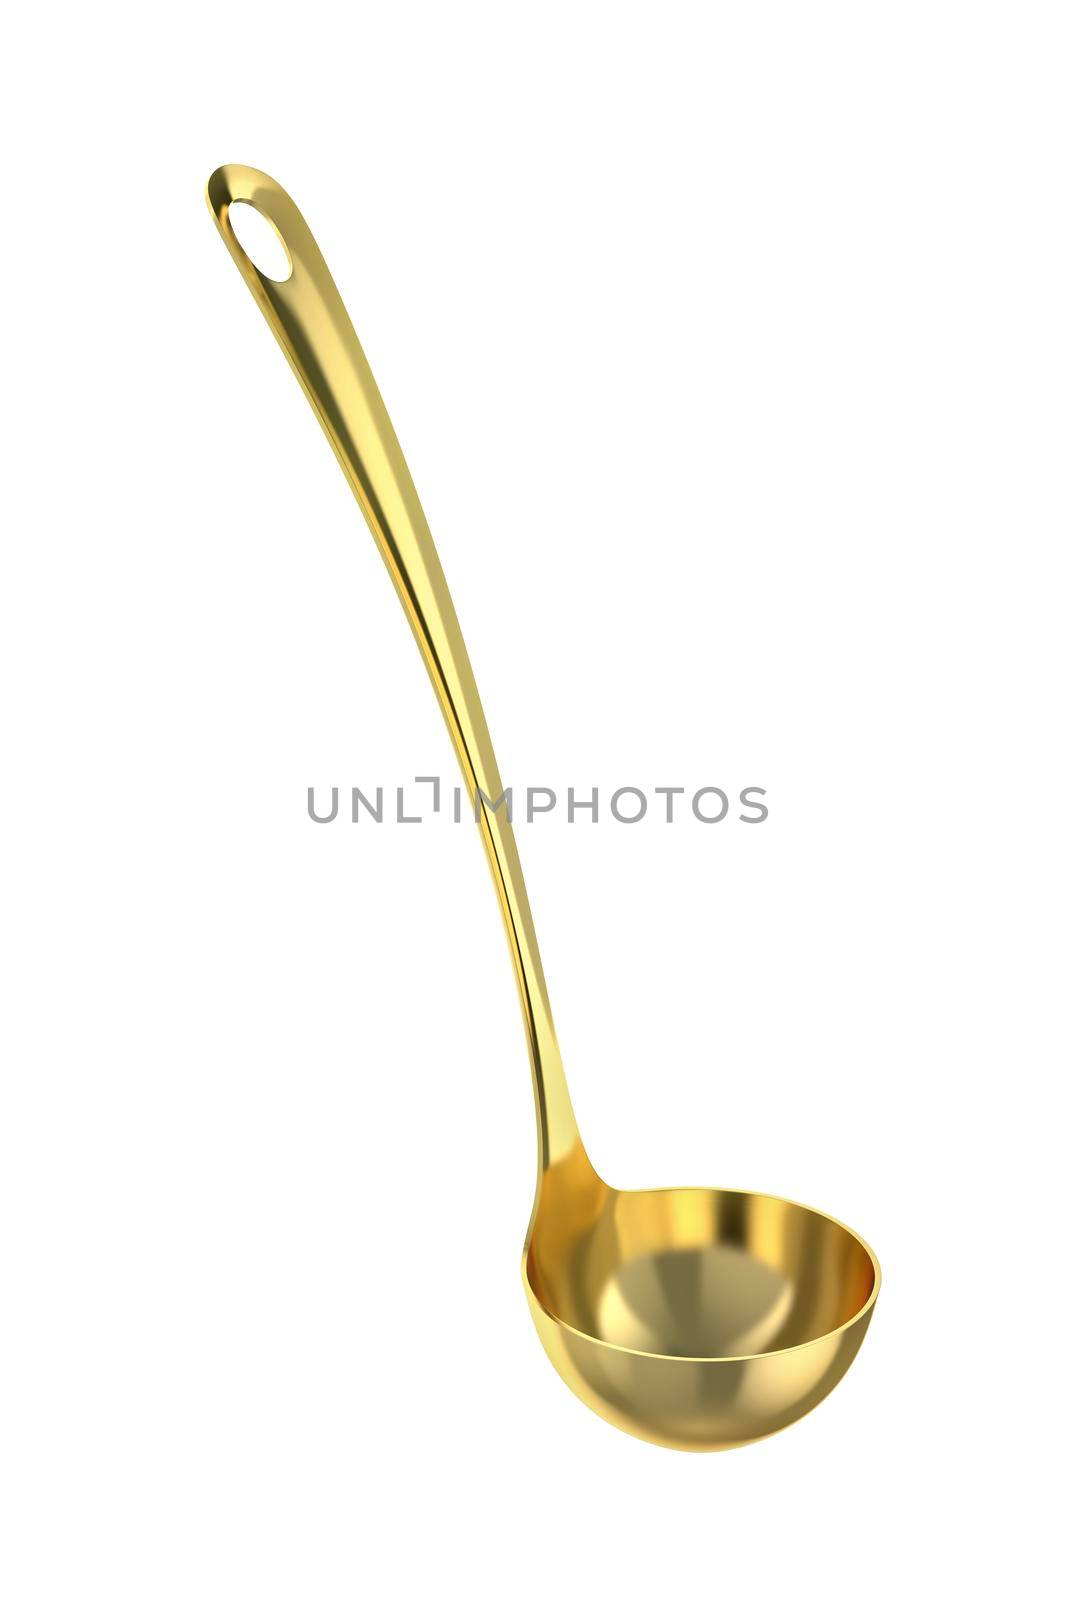 Gold ladle by magraphics